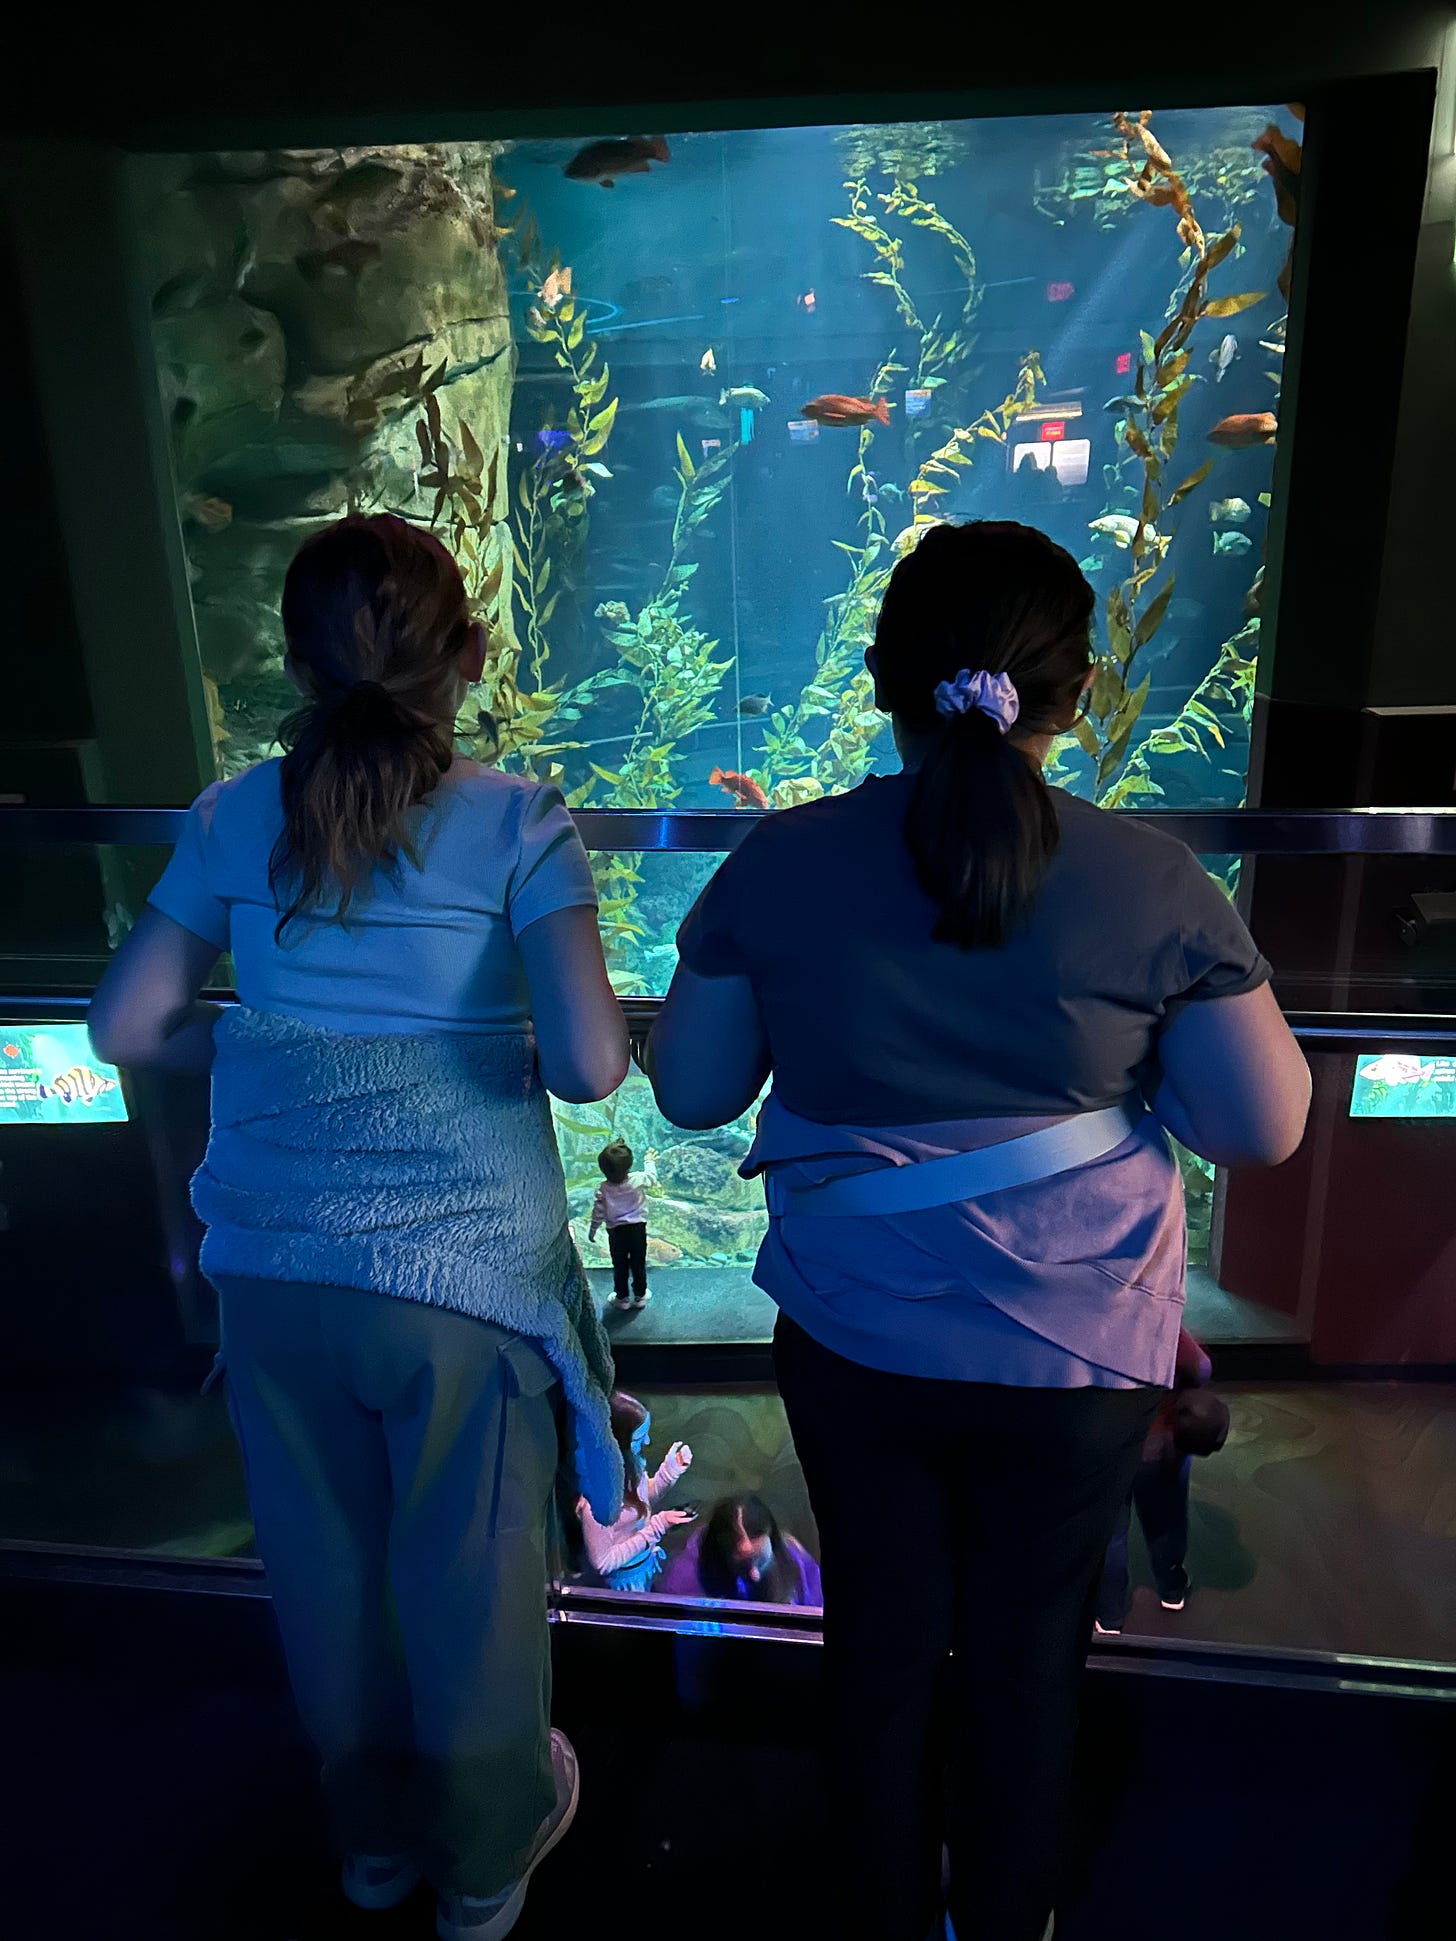 Two young girls with dark hair pulled in ponytails stand in front of a large aquarium display filled with brightly coloured fish.